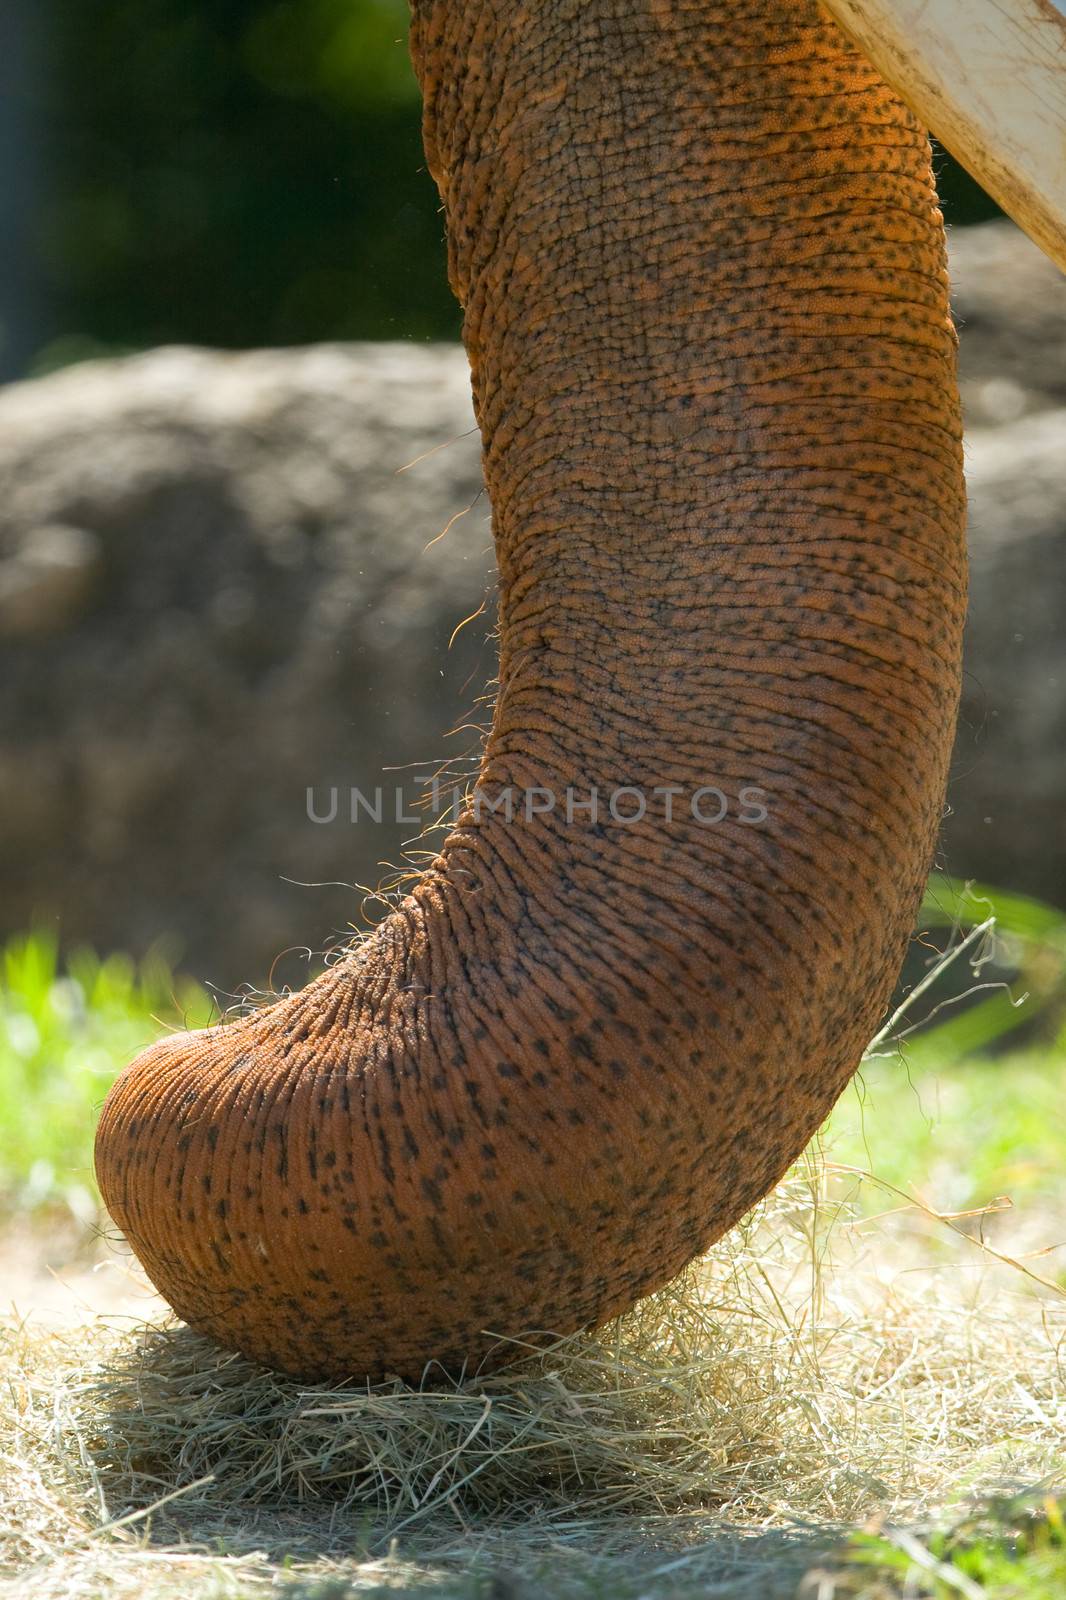 Details of long snout of an African elephant's (Loxodonta africana)